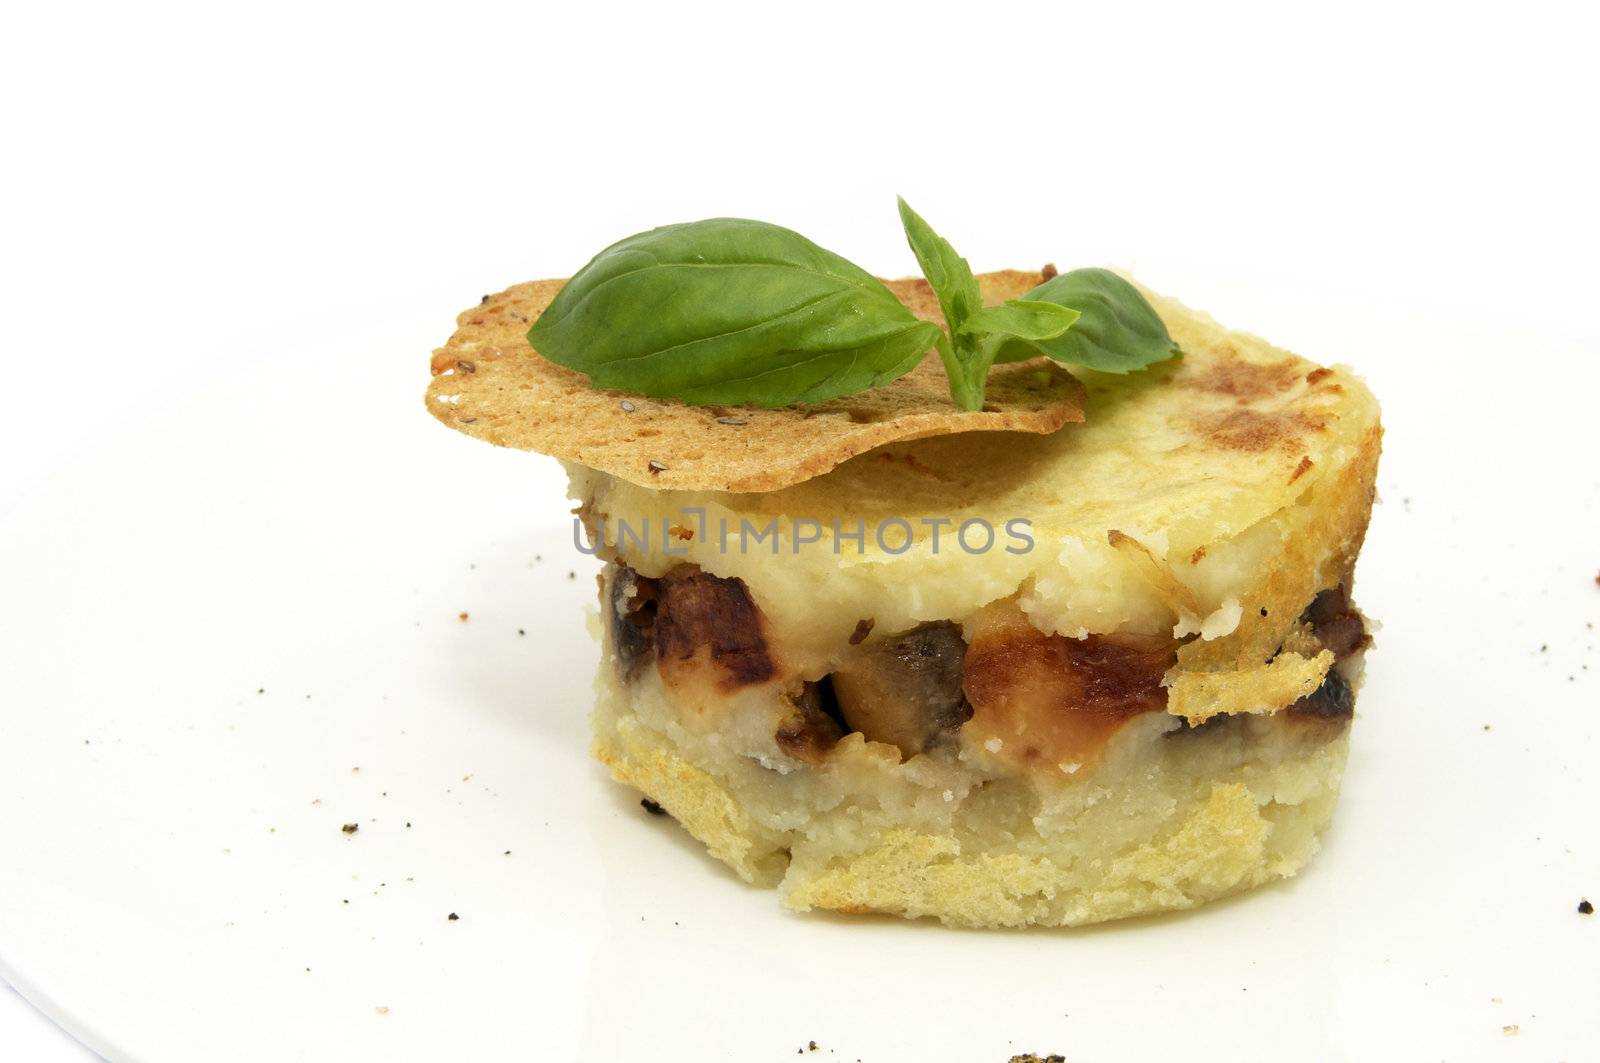 potato casserole decorated with greens and tomato on a white background